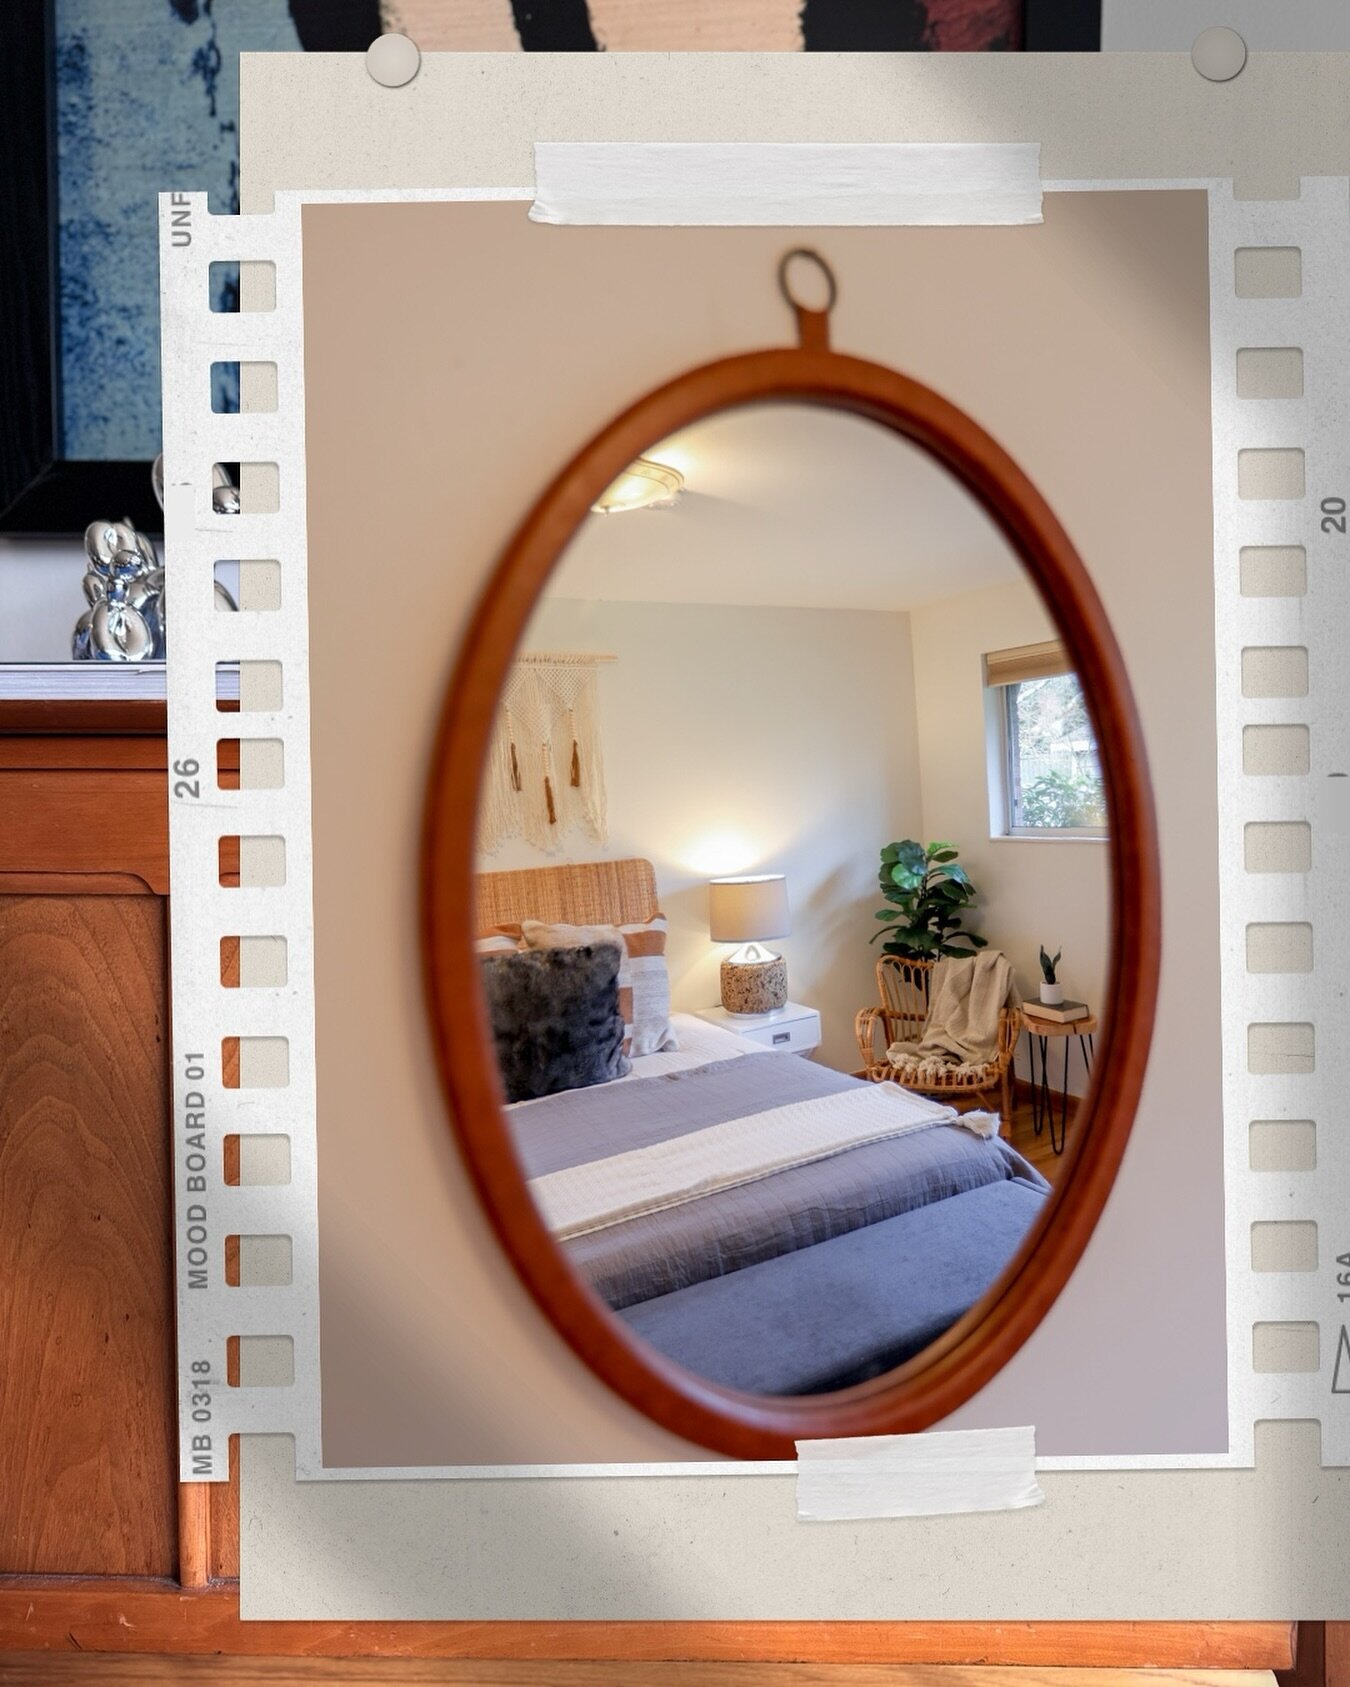 Don&rsquo;t ever underestimate the role mirrors can play in a space!

reating spaces that are cozy and functional!

#seattleinteriordesign #seattledesigner #seattleart
#seattleinteriordesign #seattledesigner #seattleart #washingtonhomes #seattlehomes